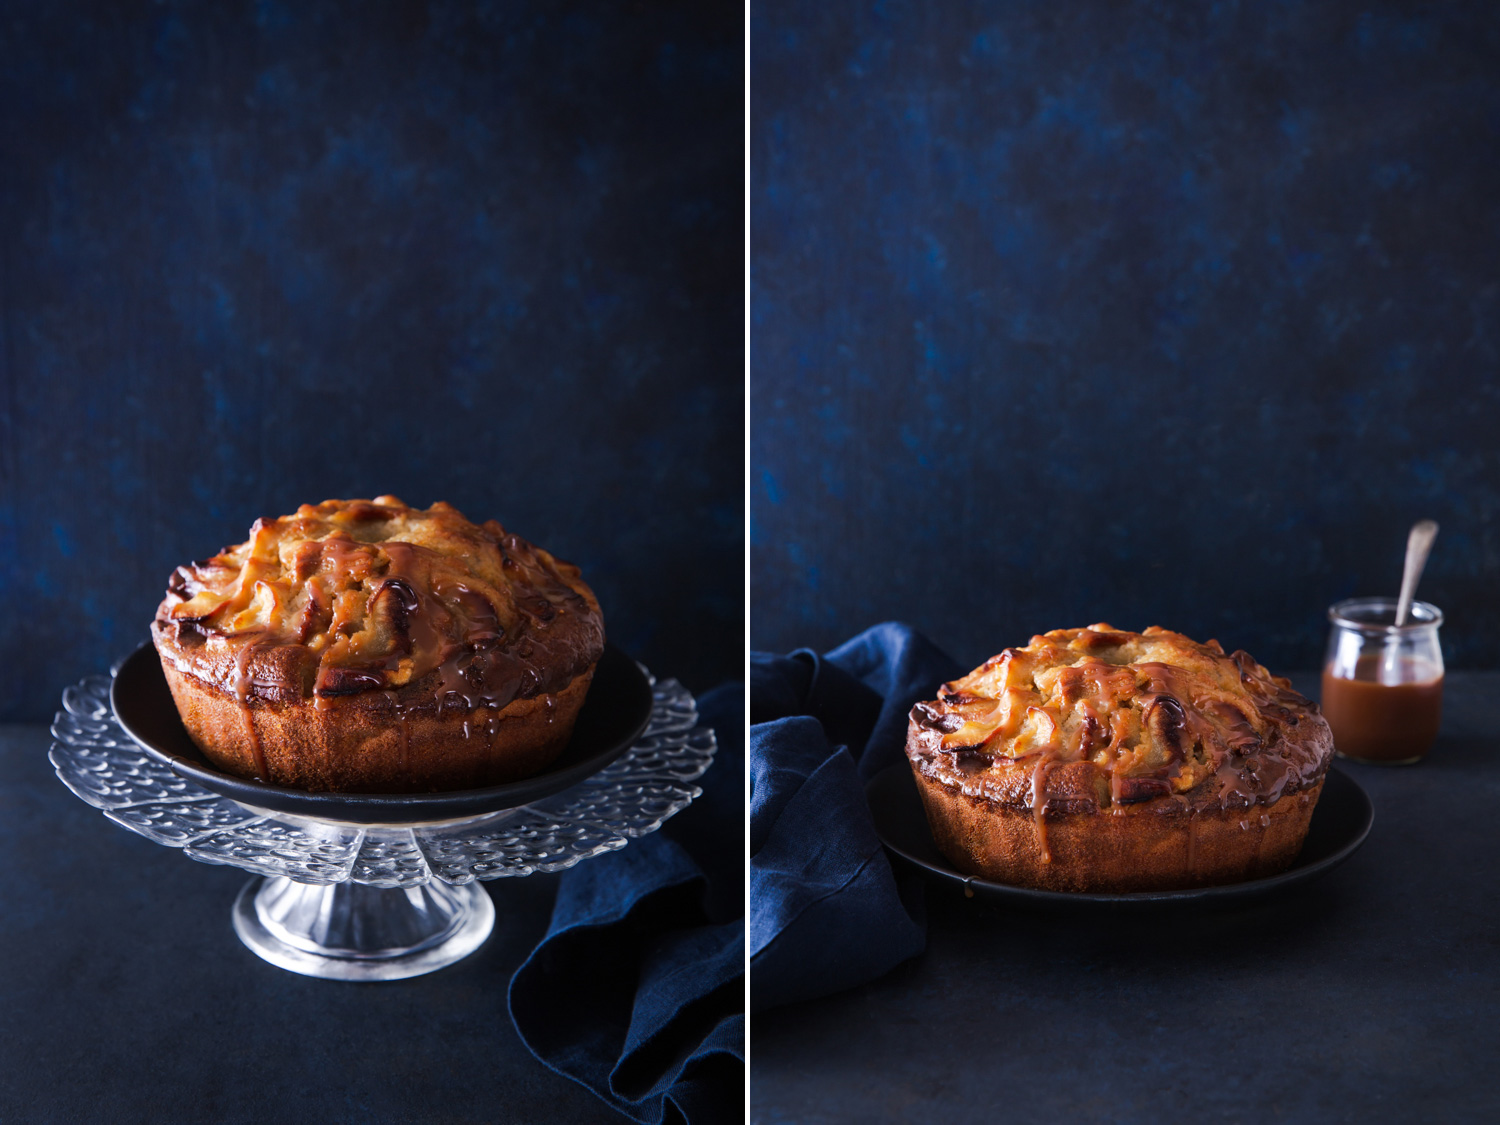 Your Workflow for Styling Food Photography